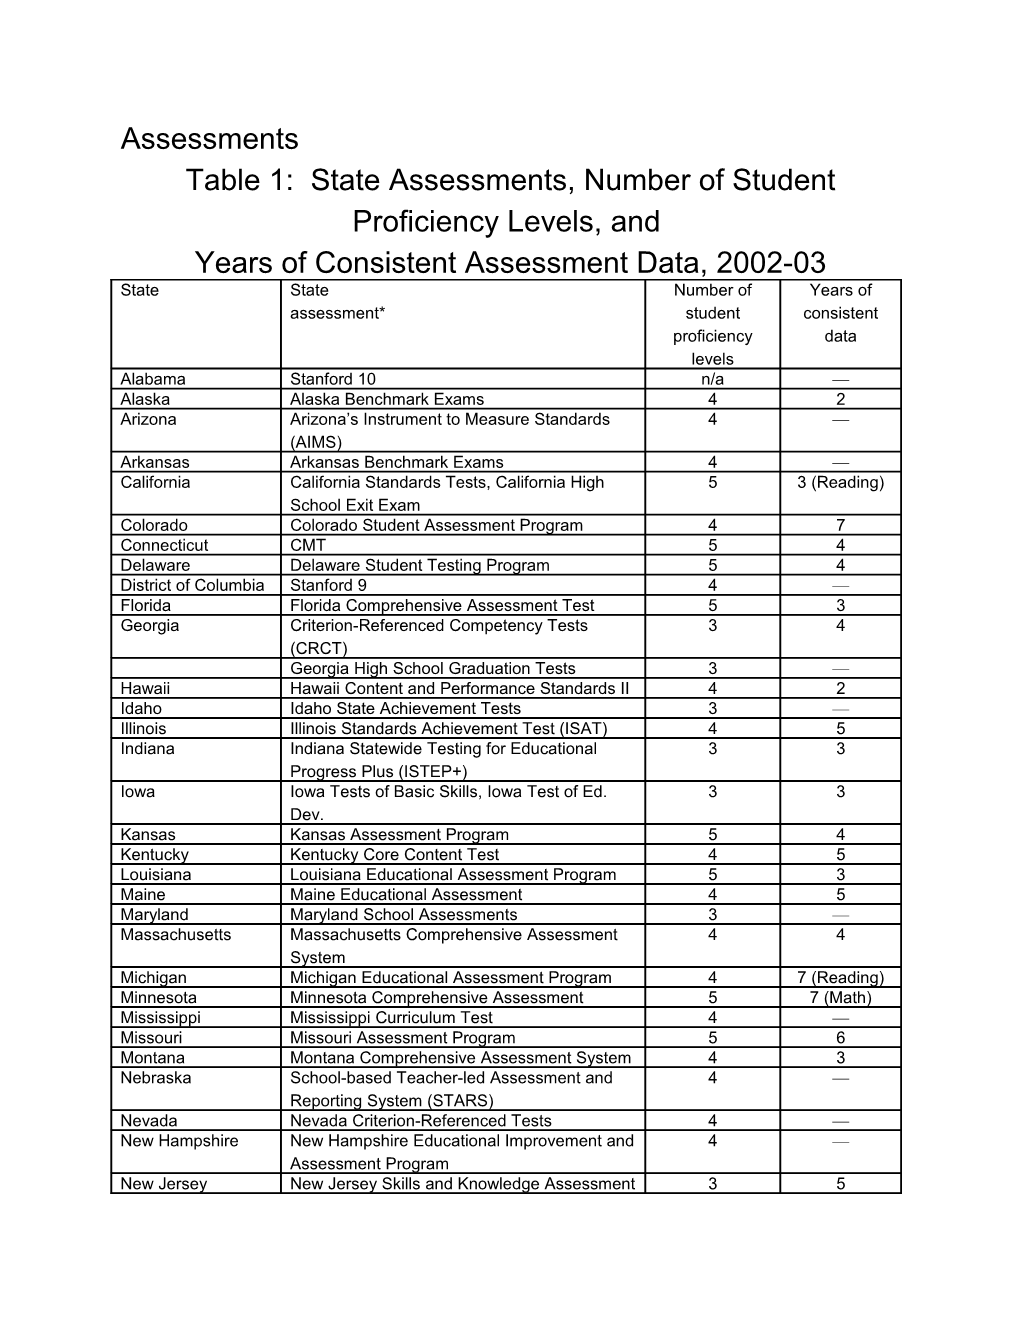 Table 1: State Assessments, Proficiency Levels, and Years of Consistent Data (MS Word)